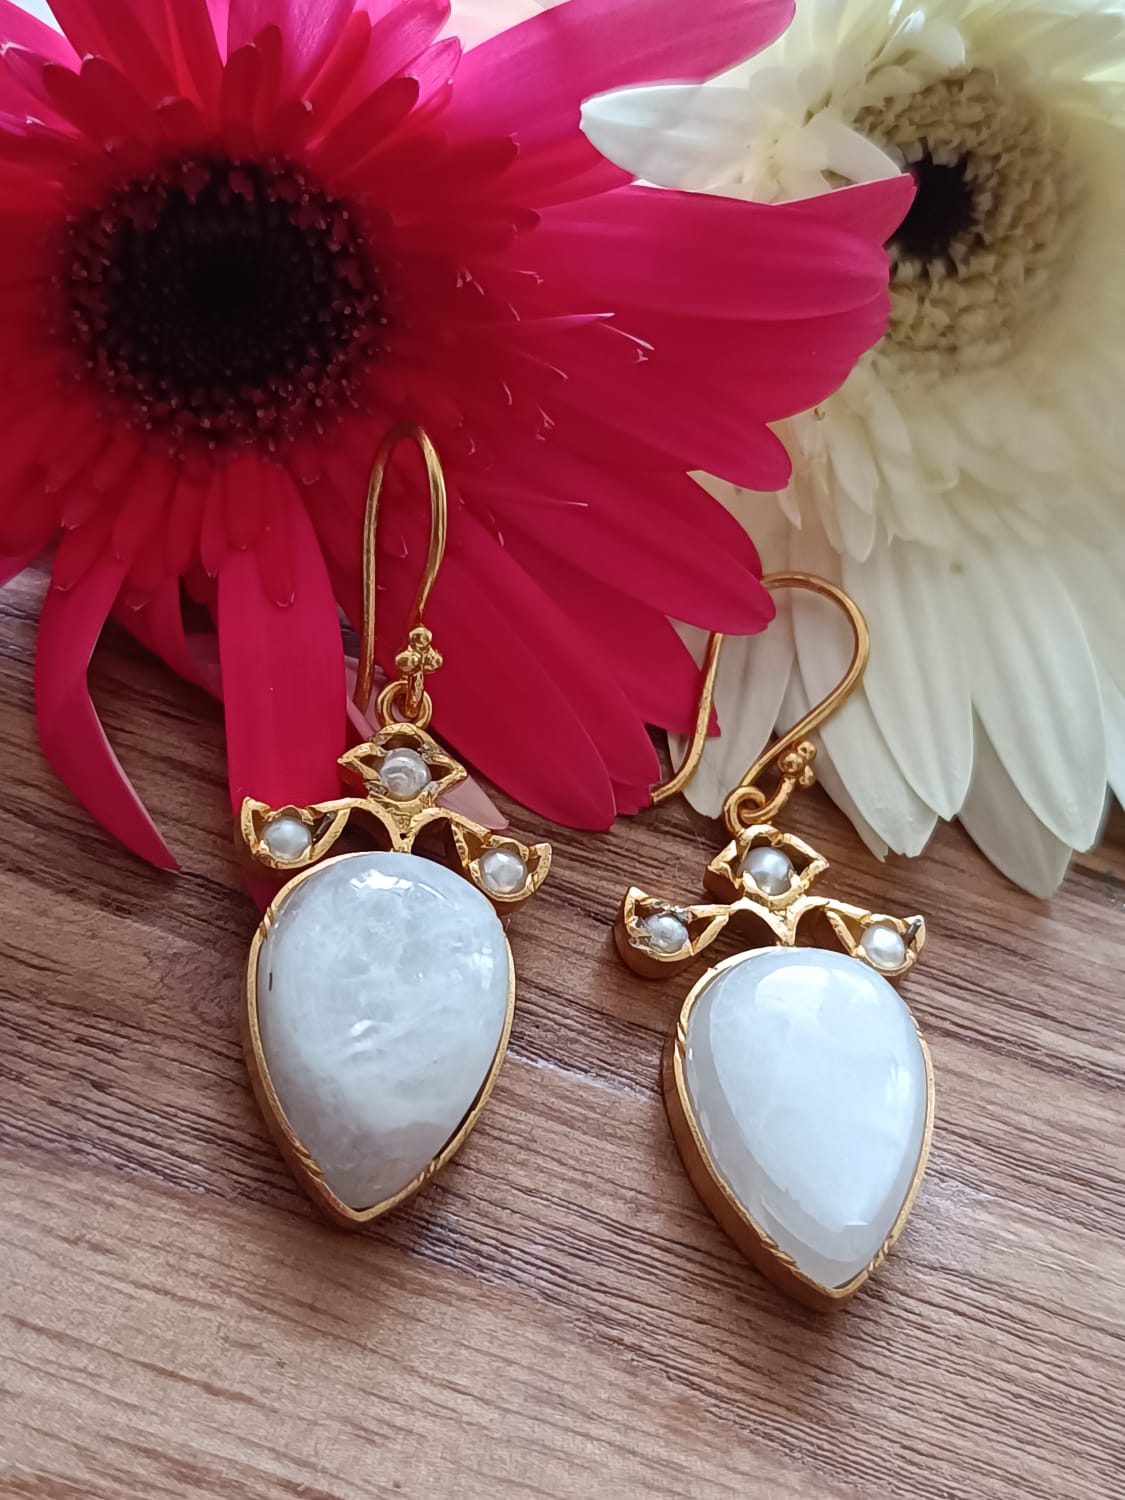 Moonstone earrings, 92.5 sterling silver with pearls and moonstones with, 1 micron gold plating